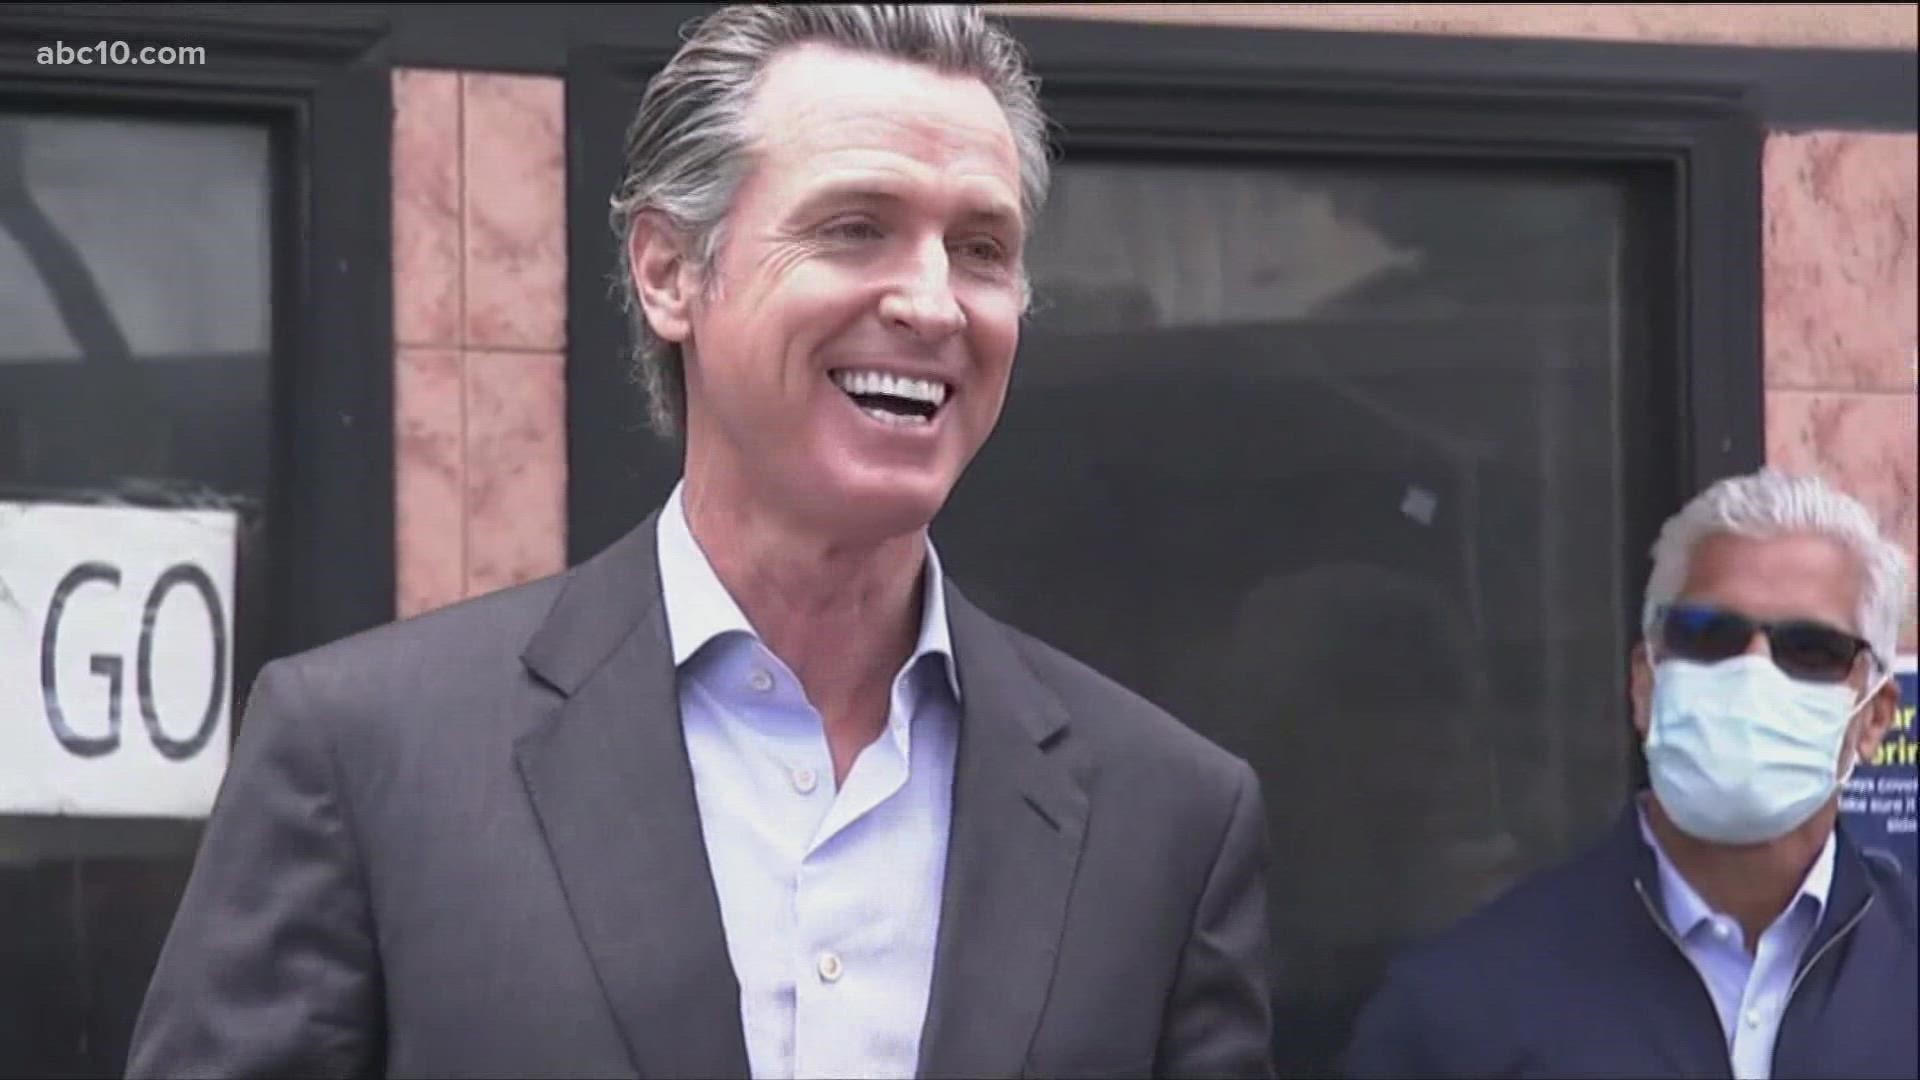 California Governor Gavin Newsom is highlighting the state’s ongoing support for restaurants and bars as California fully reopens the economy this month.